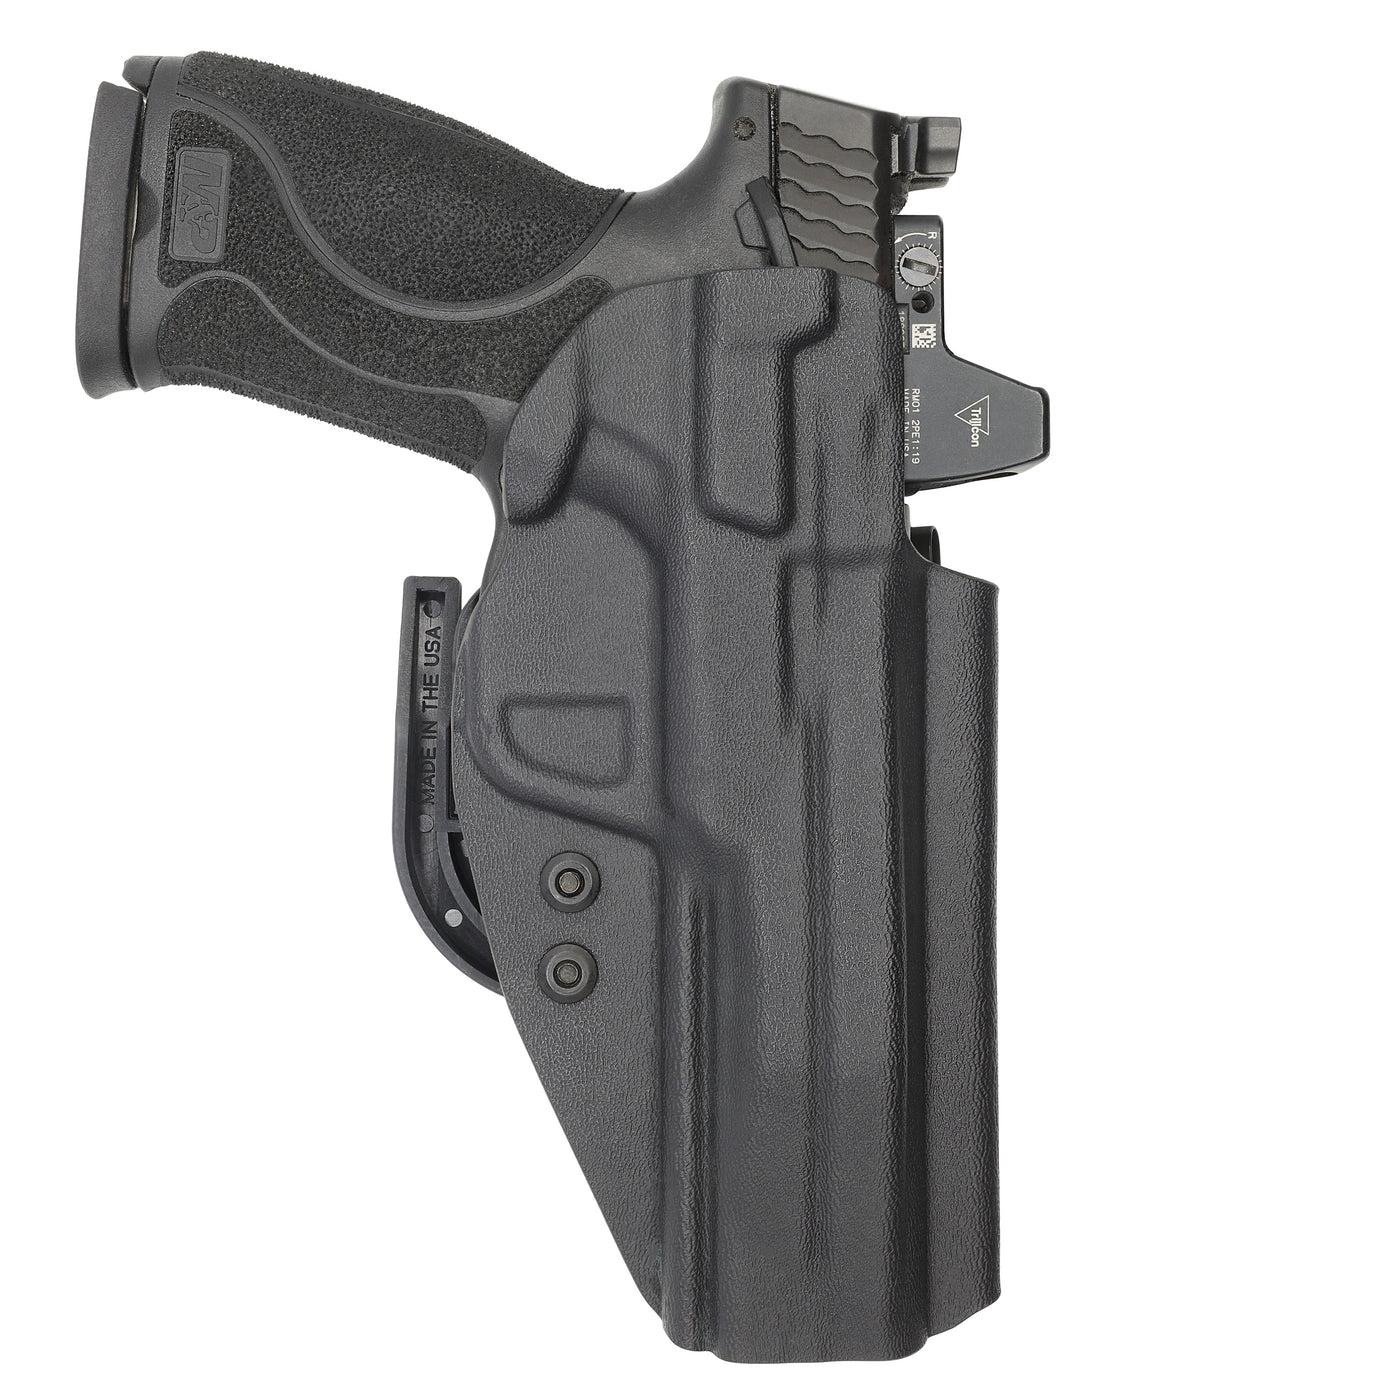 C&G Holsters quickship IWB ALPHA UPGRADE Covert M&P 10/45 5" LEFT HAND in holstered position back view